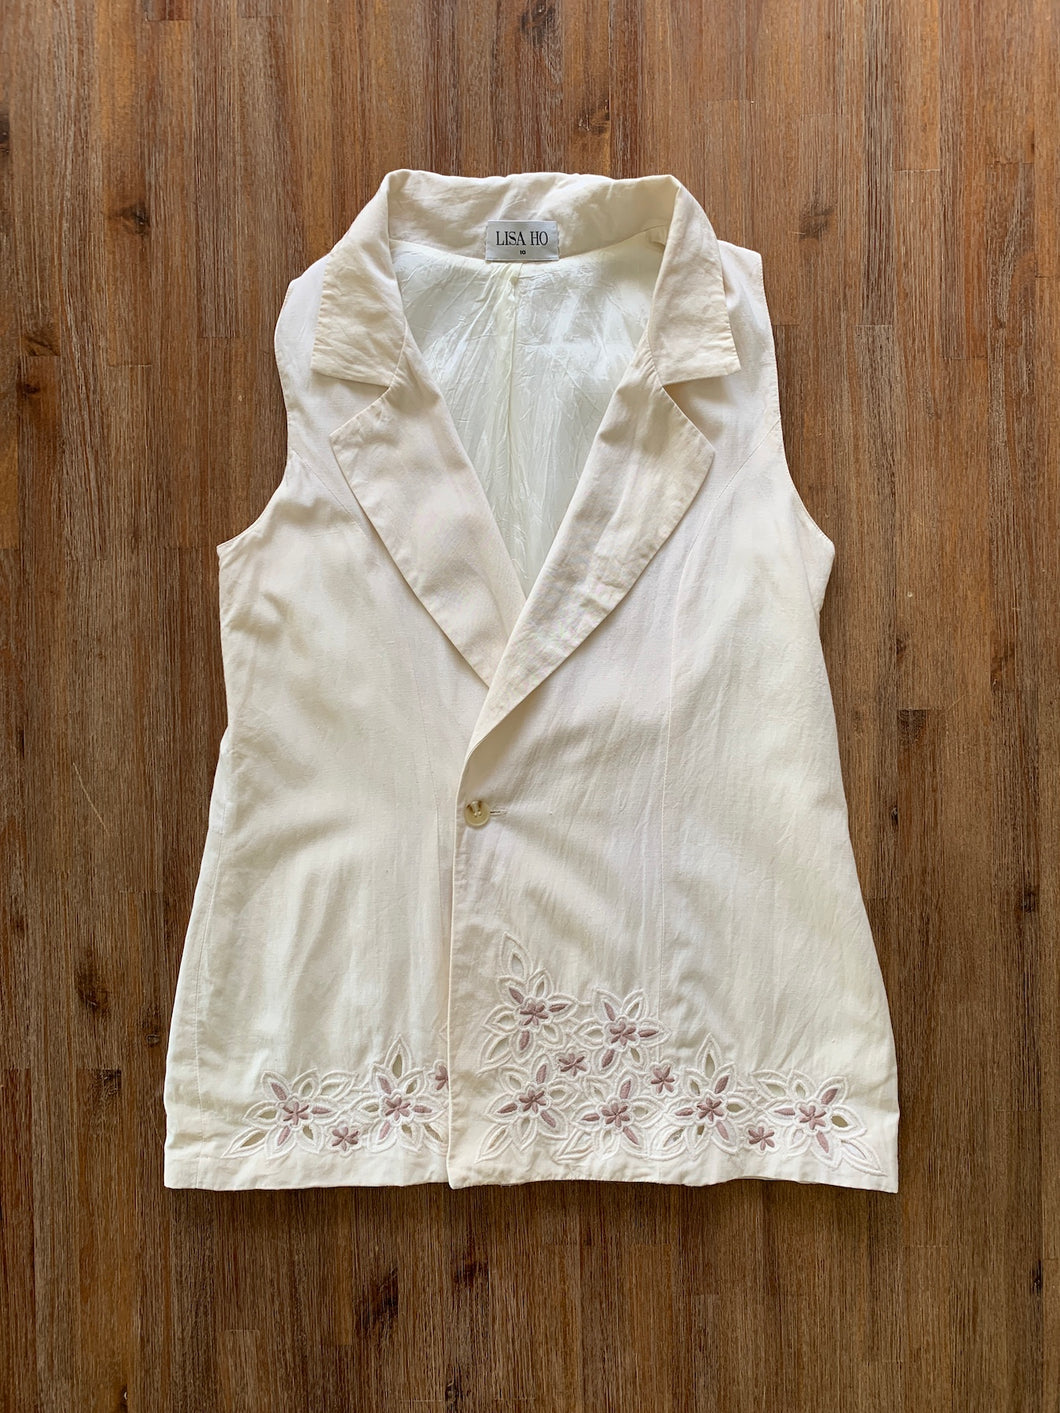 LISA HO Size Beige/Off White Blouse with Floral Embroidery Women's JAN12